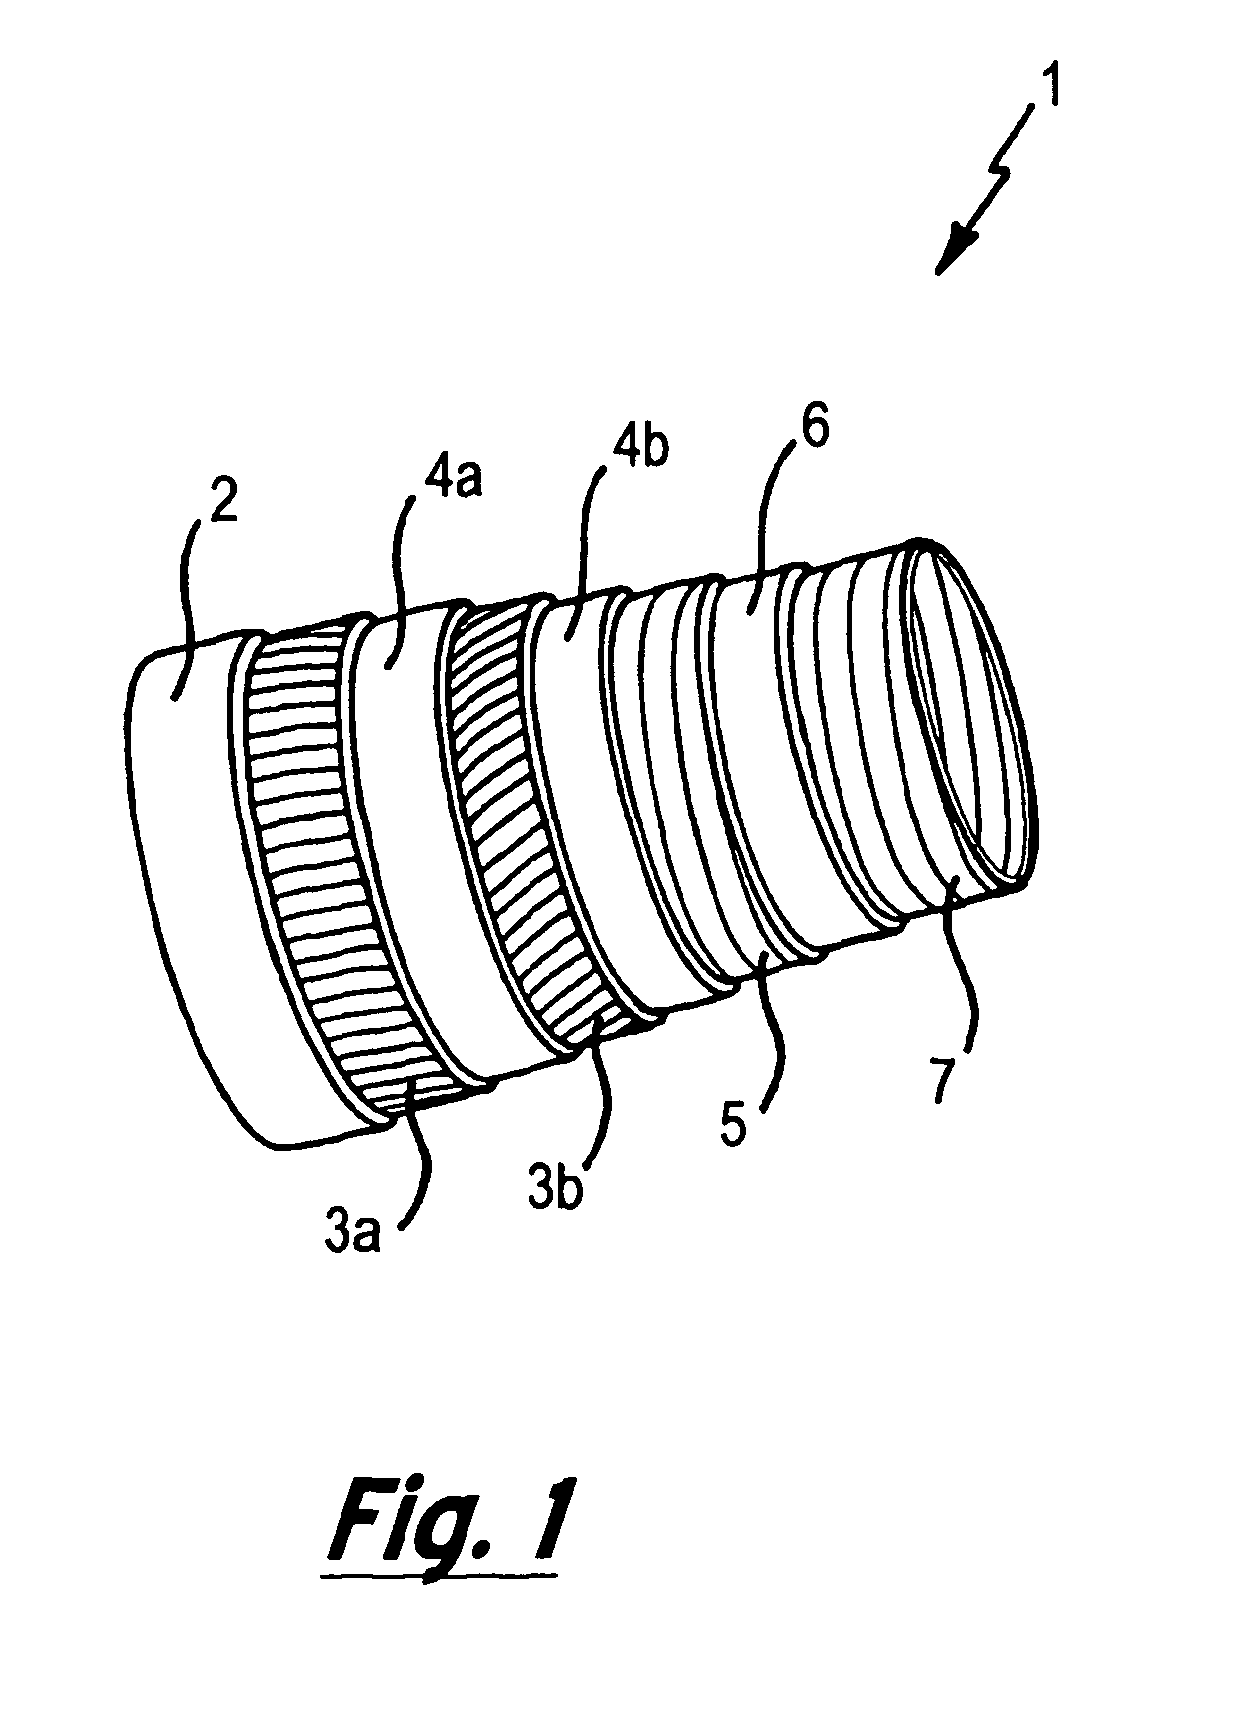 Electromagnet inspection apparatus with a movable magnet and method for non-destructive testing of electrically conductive test components